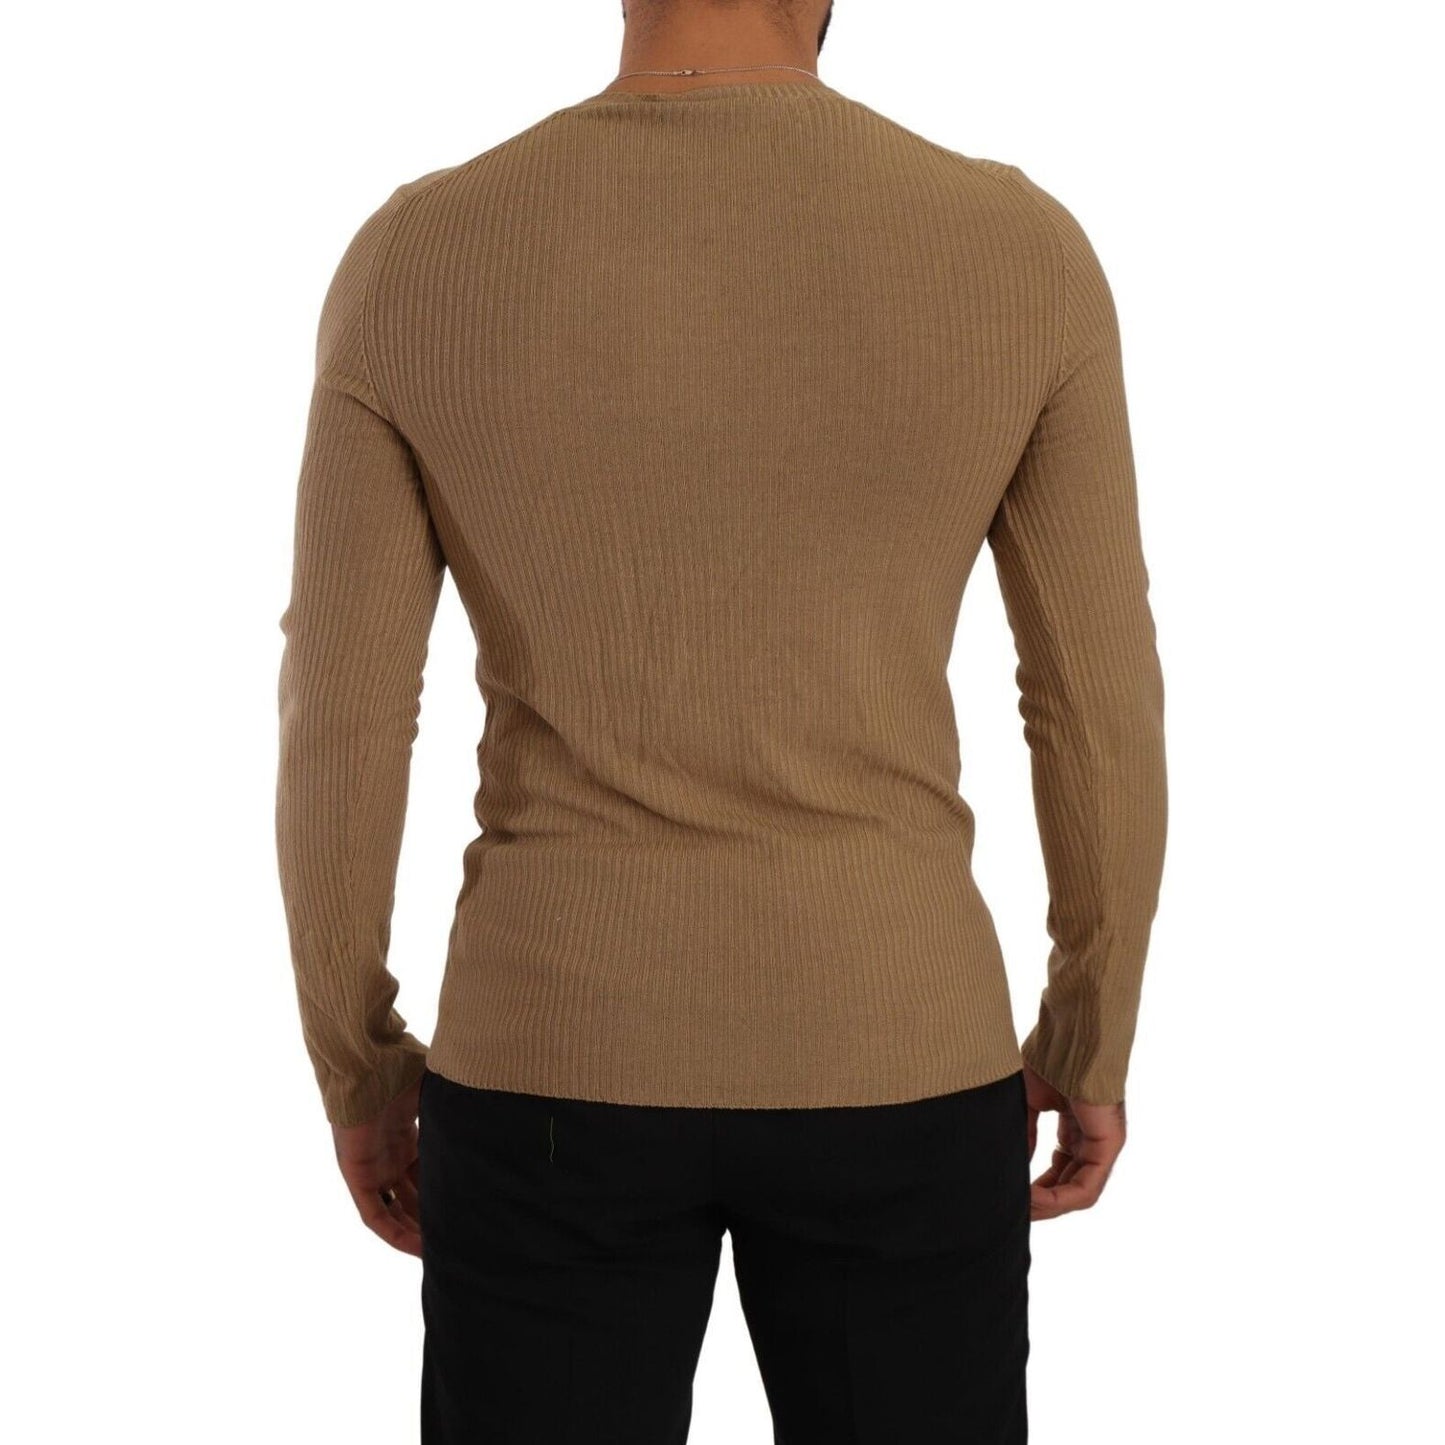 Ermanno Scervino Classic V-Neck Wool Sweater in Brown brown-wool-knit-v-neck-men-pullover-sweater s-l1600-61-1-e256a269-e7d.jpg